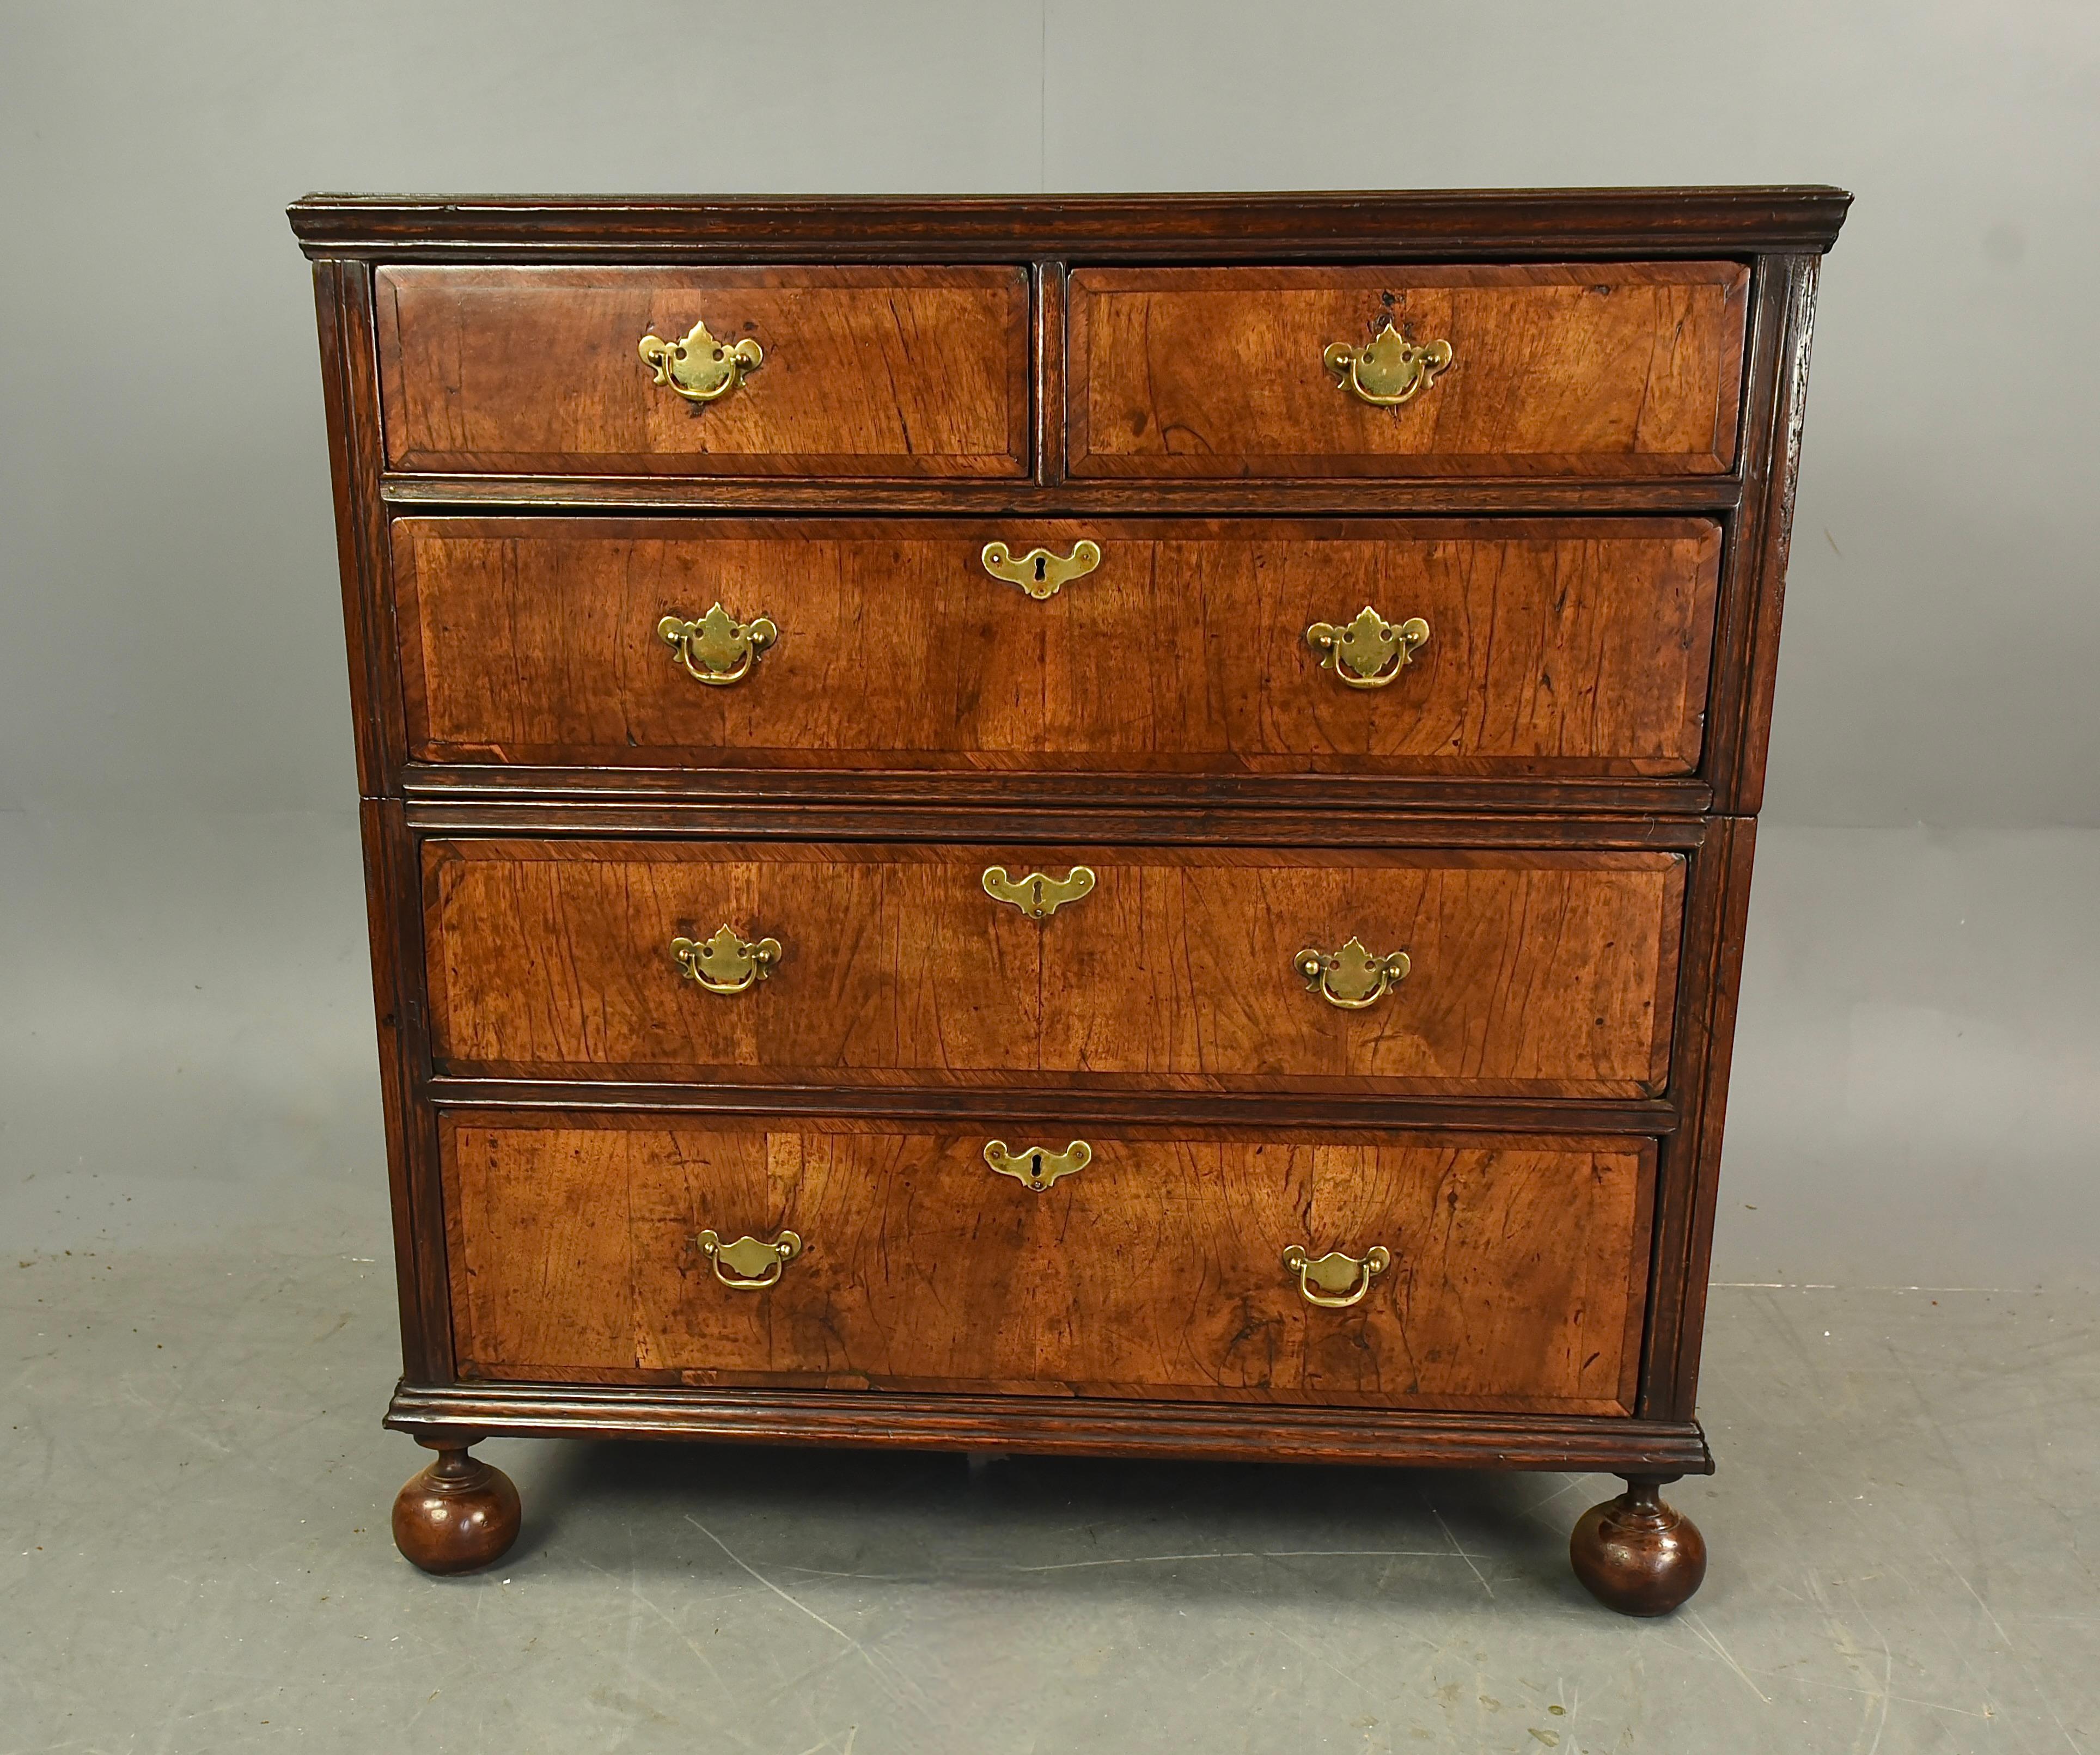 A wonderful Queen Anne walnut chest of drawers circa 1700 .
The chest of drawers consist of two small over three large drawers .
All the drawers have wonderful English oak linings with hand cut dovetail joints .The drawer fronts have a good walnut